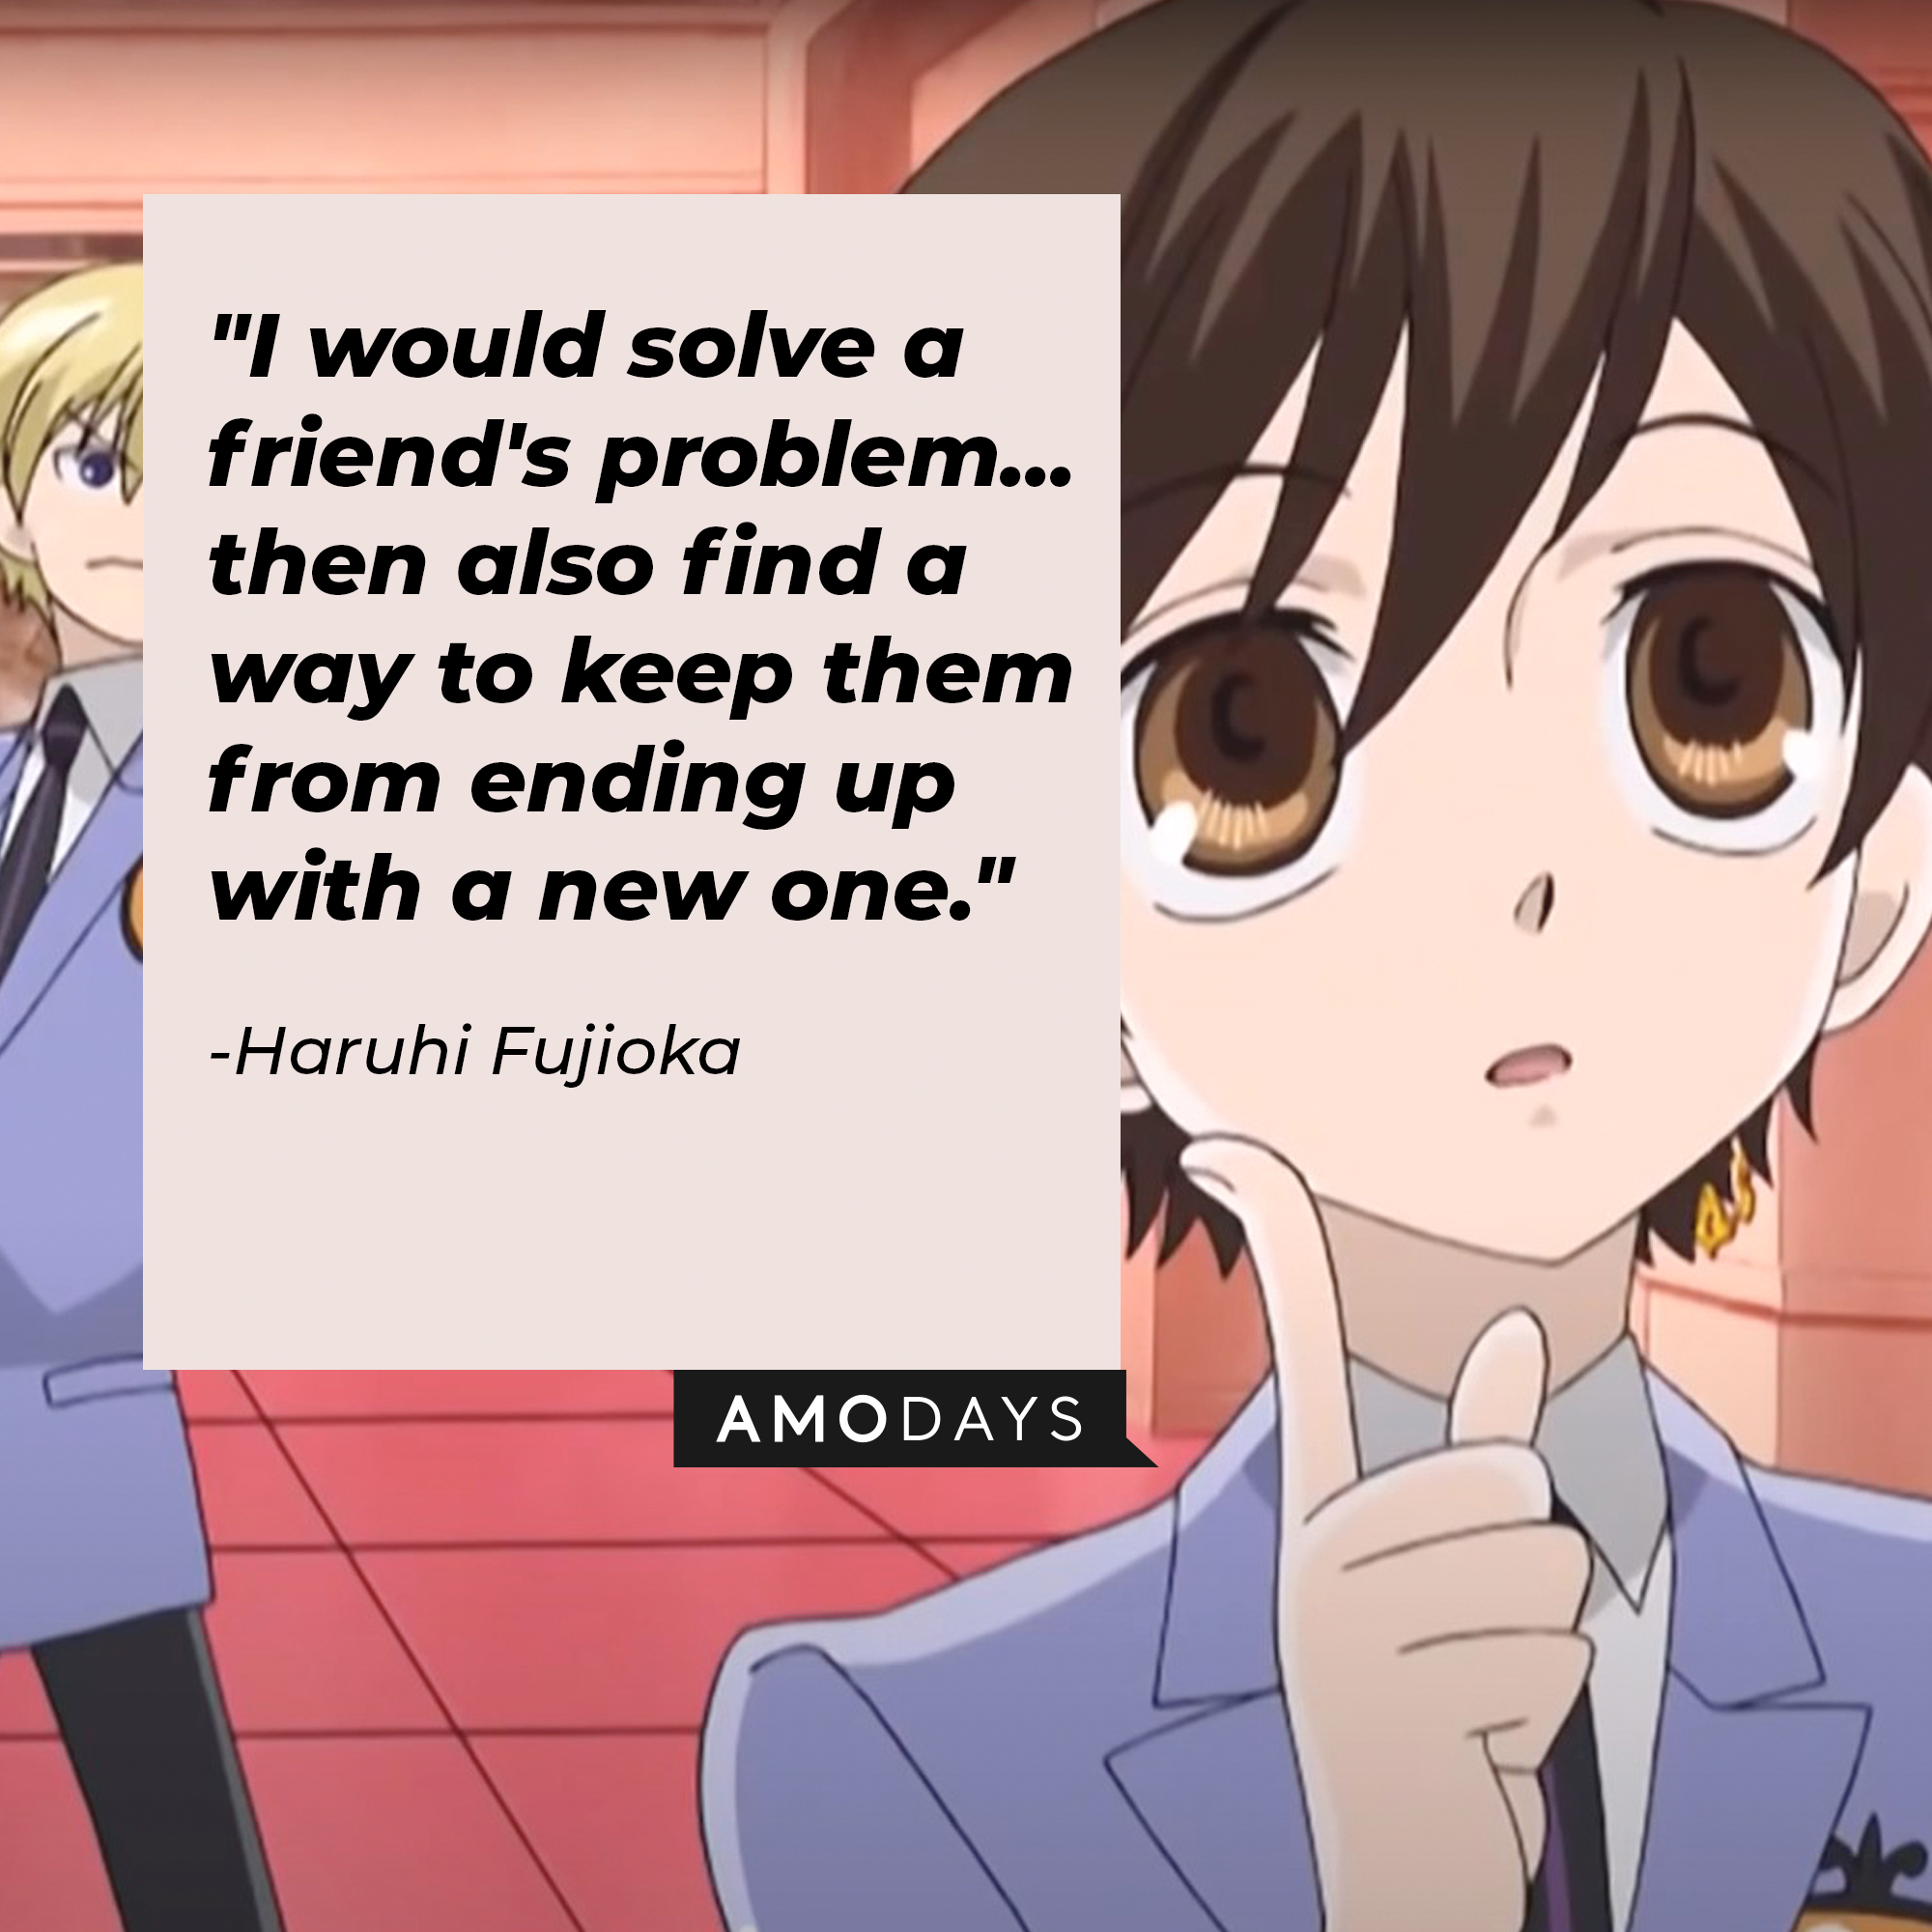 Haruhi Fujioka's quote: "I would solve a friend's problem... then also find a way to keep them from ending up with a new one." | Source: Facebook.com/theouranhostclub